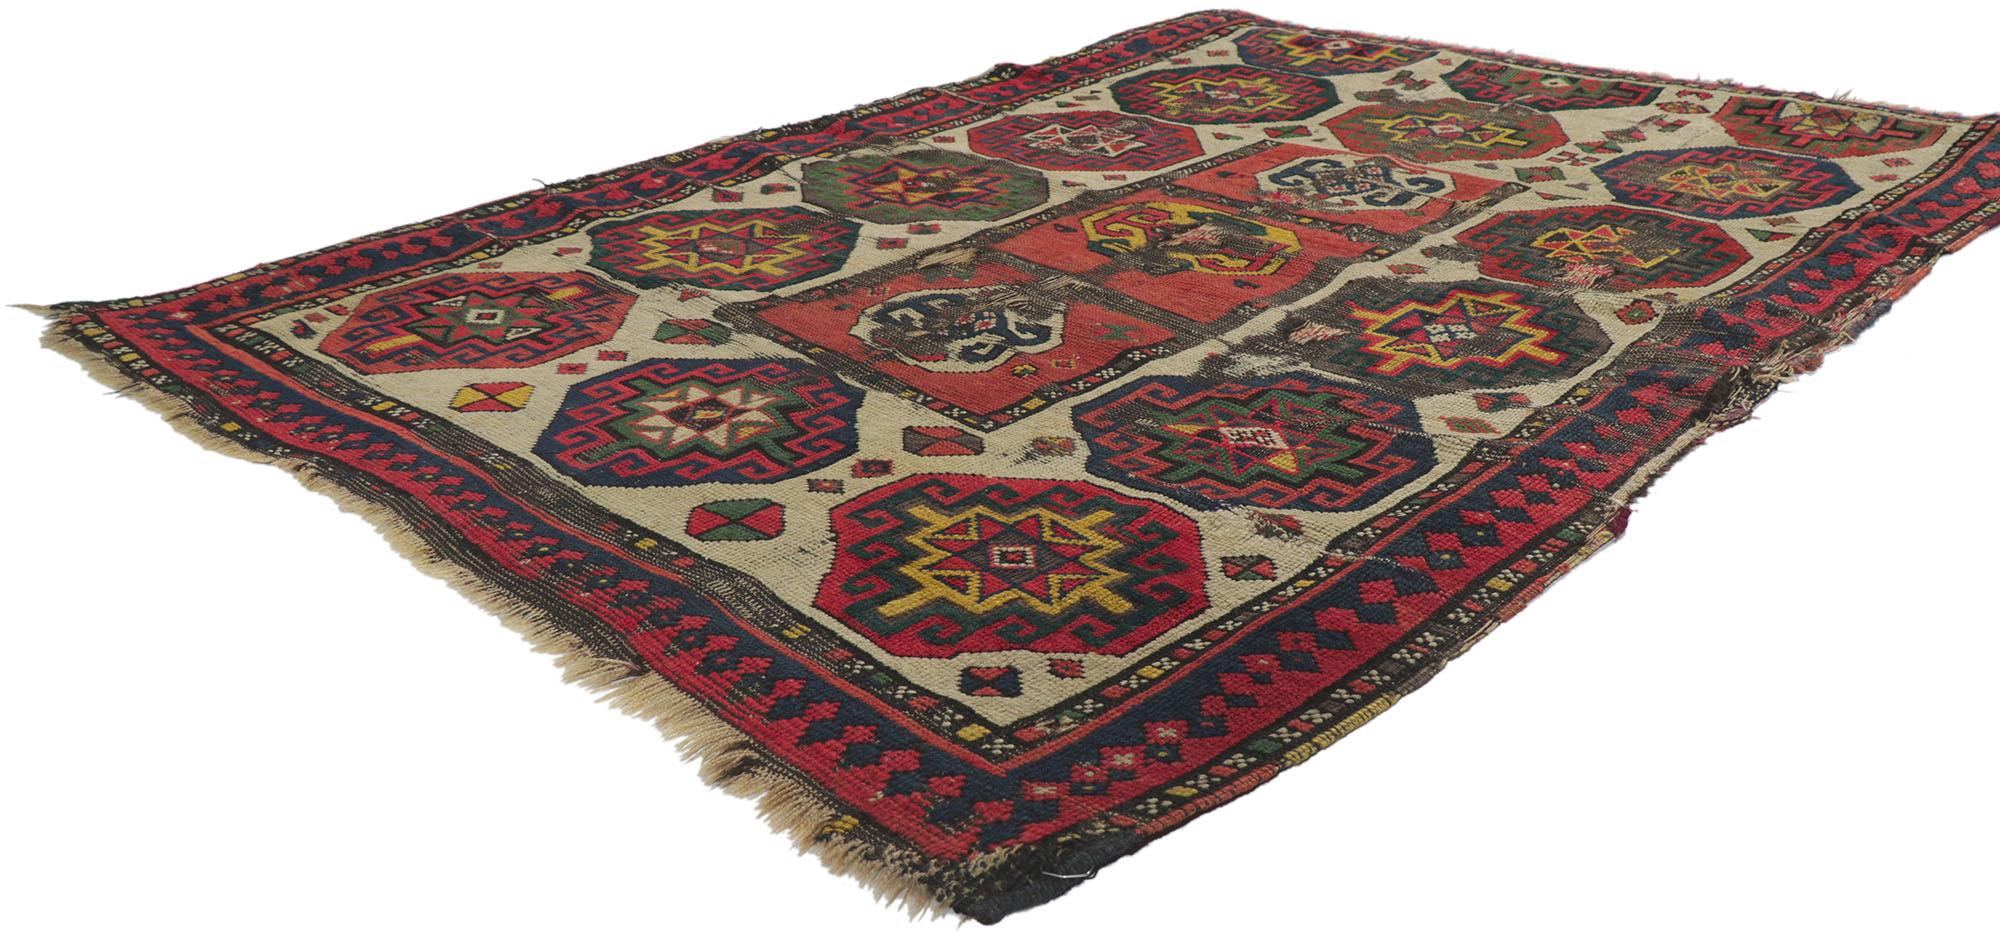 78211 Weathered Antique Caucasian Kazak distressed rug with Tribal style, 04'00 x 05'10. Full of tiny details and tribal style, this hand-knotted wool distressed antique Caucasian Kazak rug is a captivating vision of woven beauty. The weathered